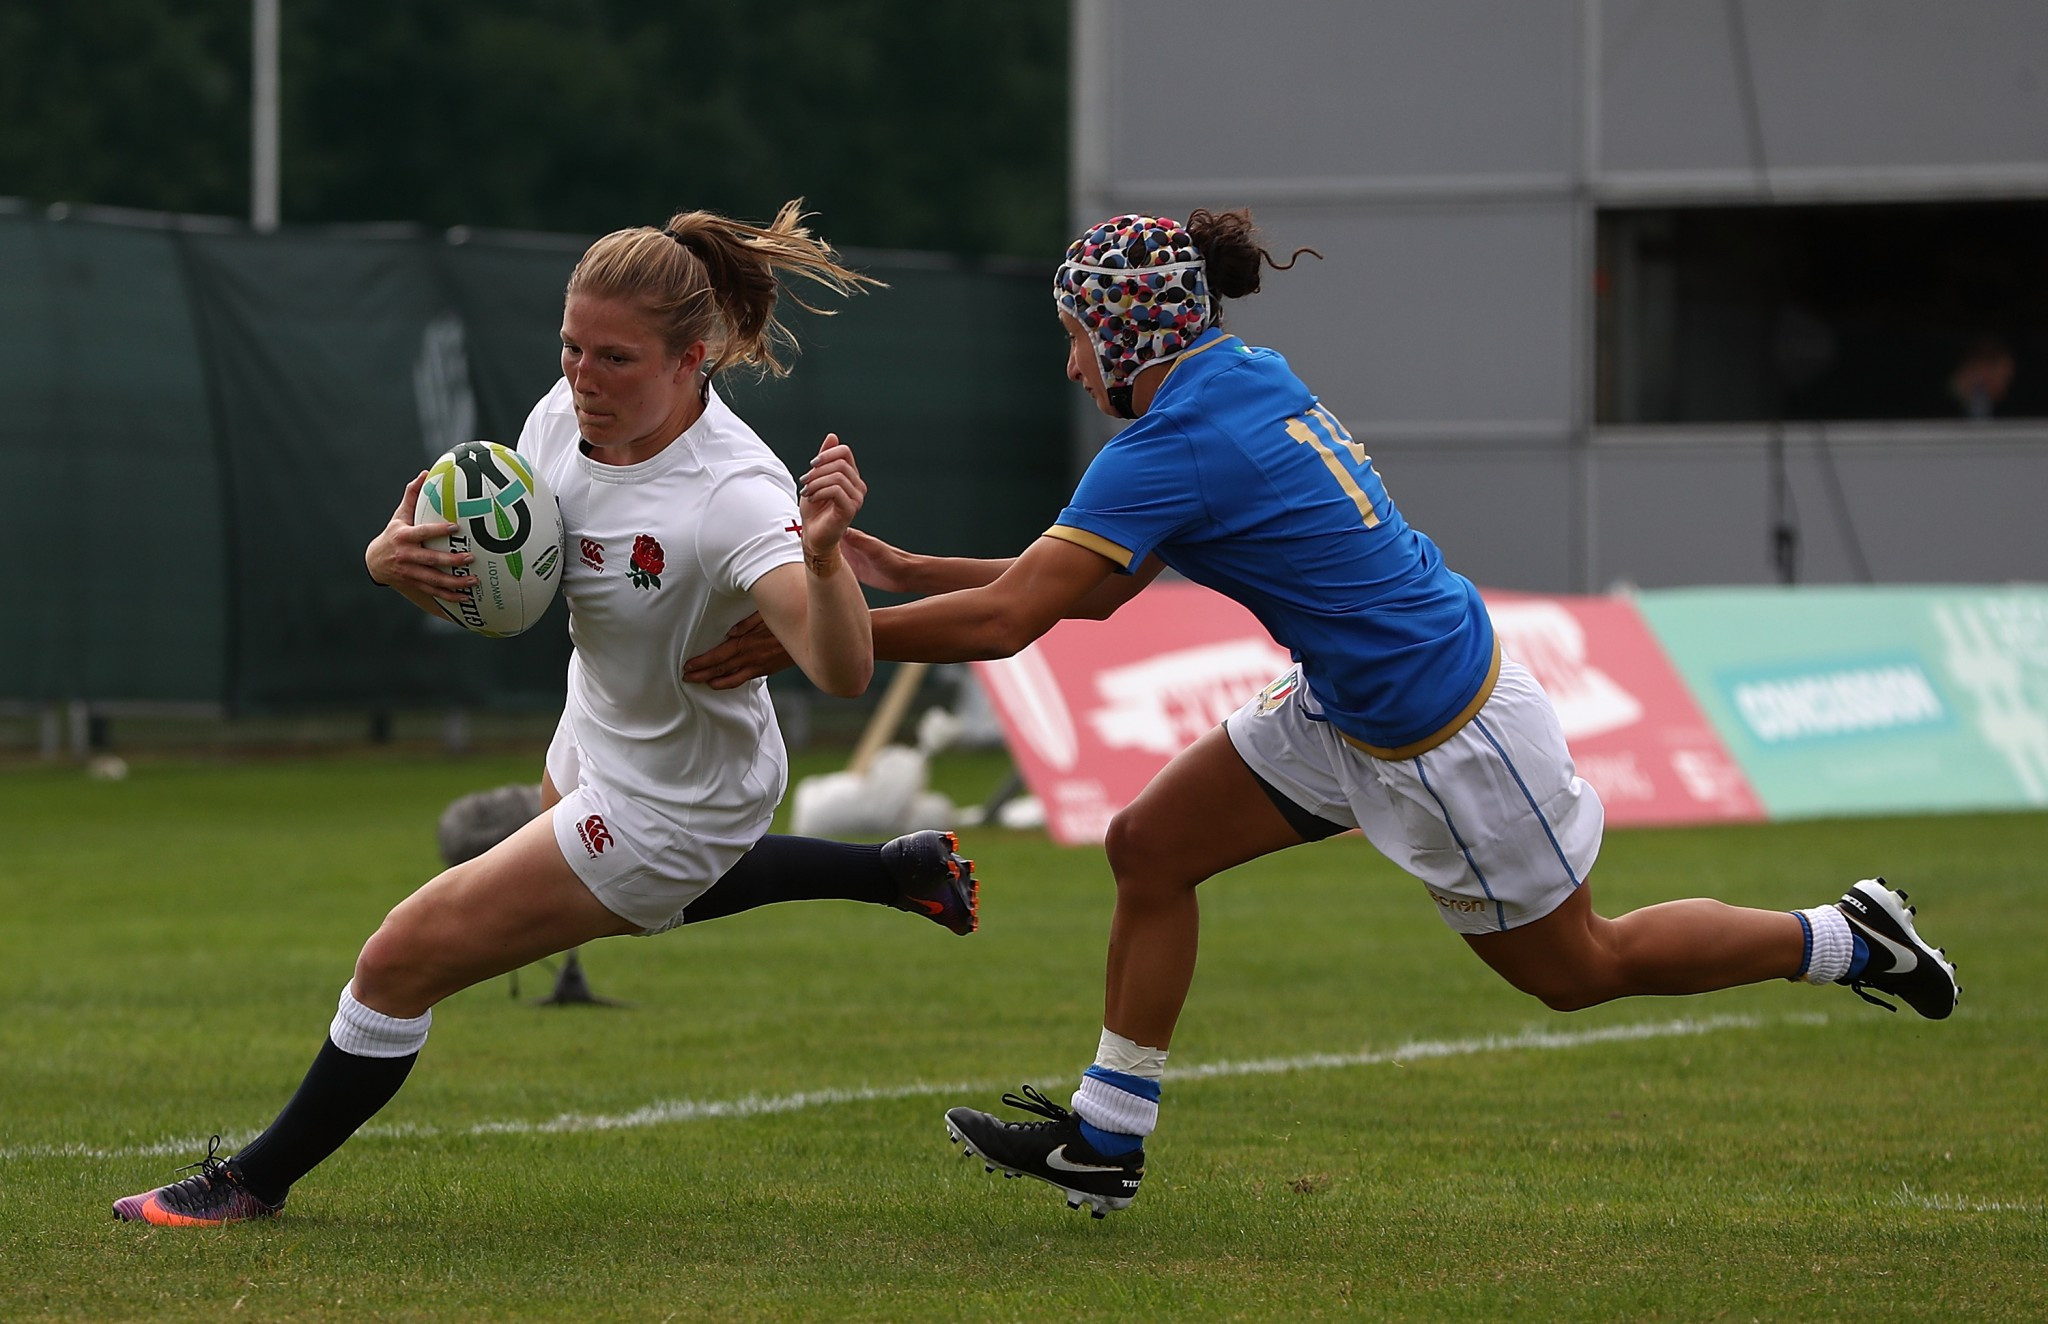 Holders England prove too strong for Italy at Women's Rugby World Cup